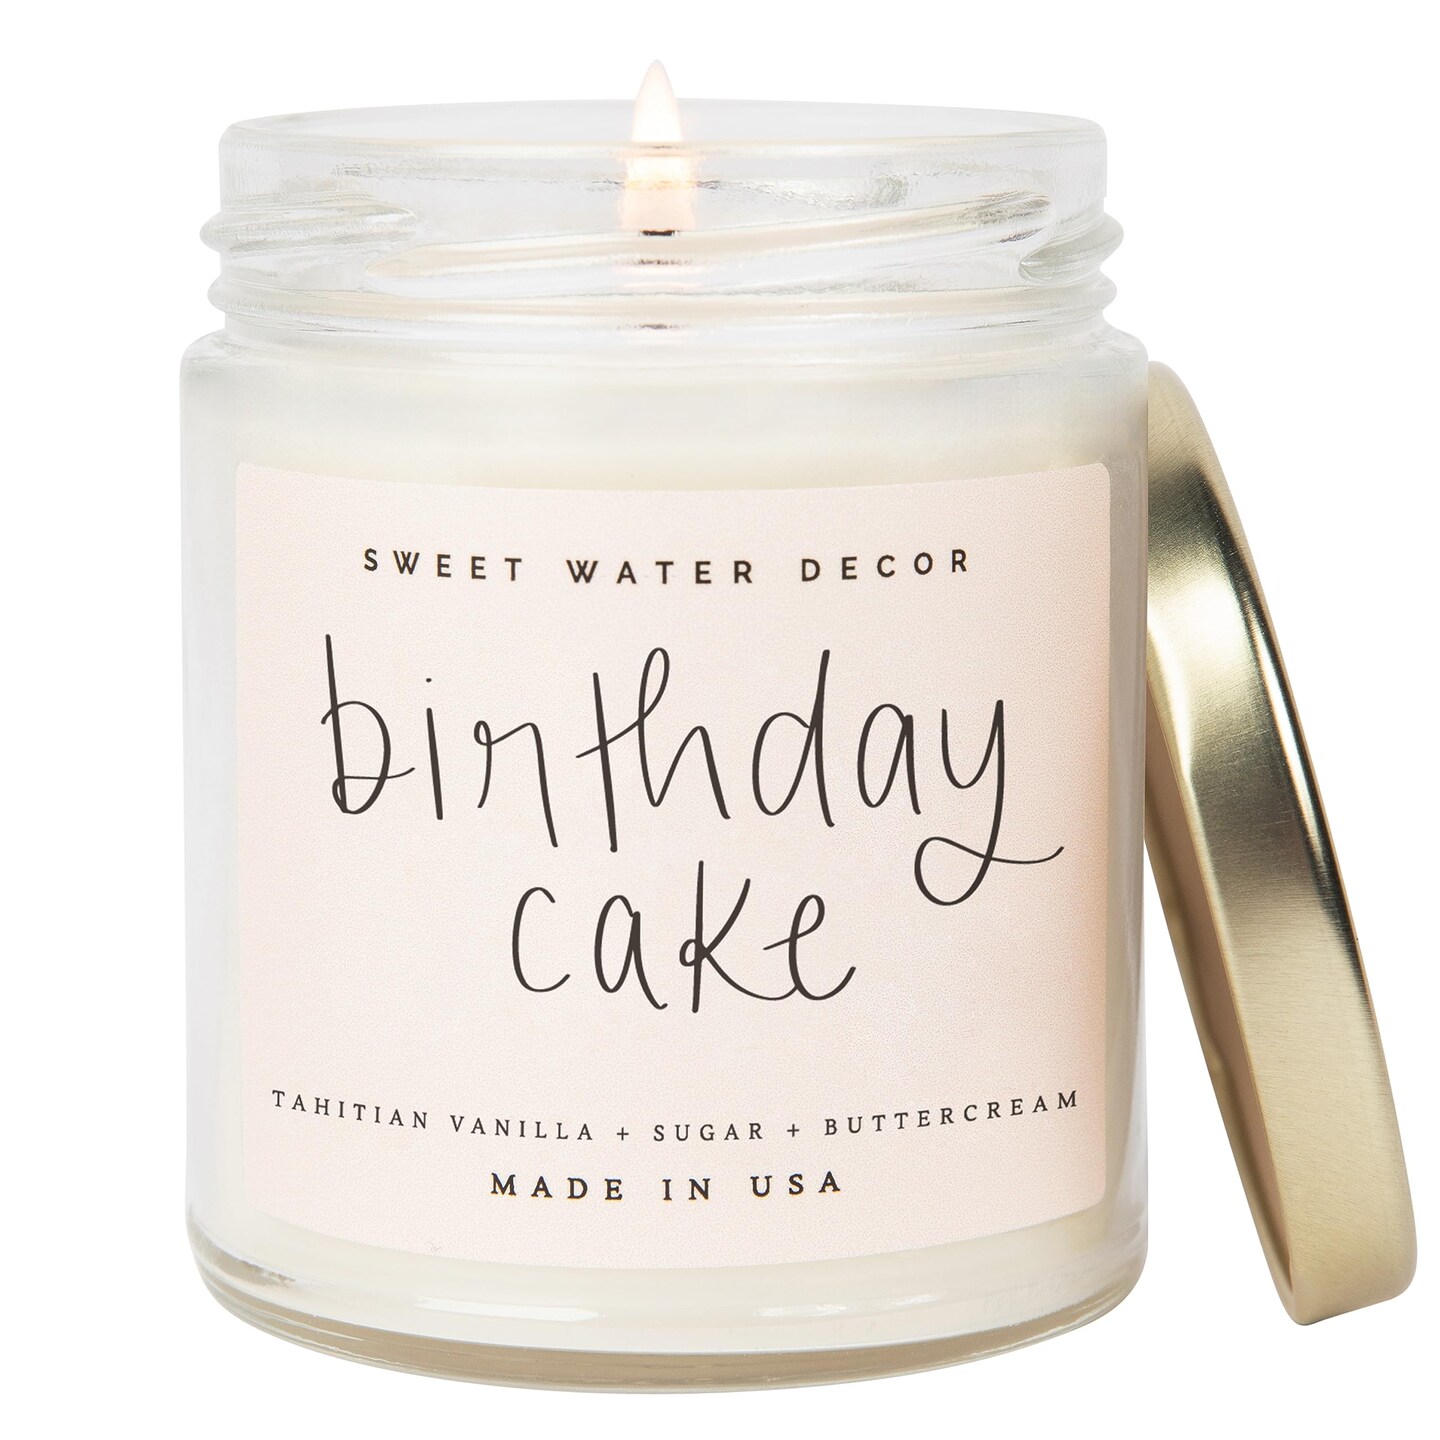 Sweet Water Decor Birthday Cake Candle, Tahitian Vanilla, Powdered Sugar, and Buttered Rum Scented Soy Wax Candle for Home | 9oz Clear Jar, 40 Hour Burn Time, Made in the USA